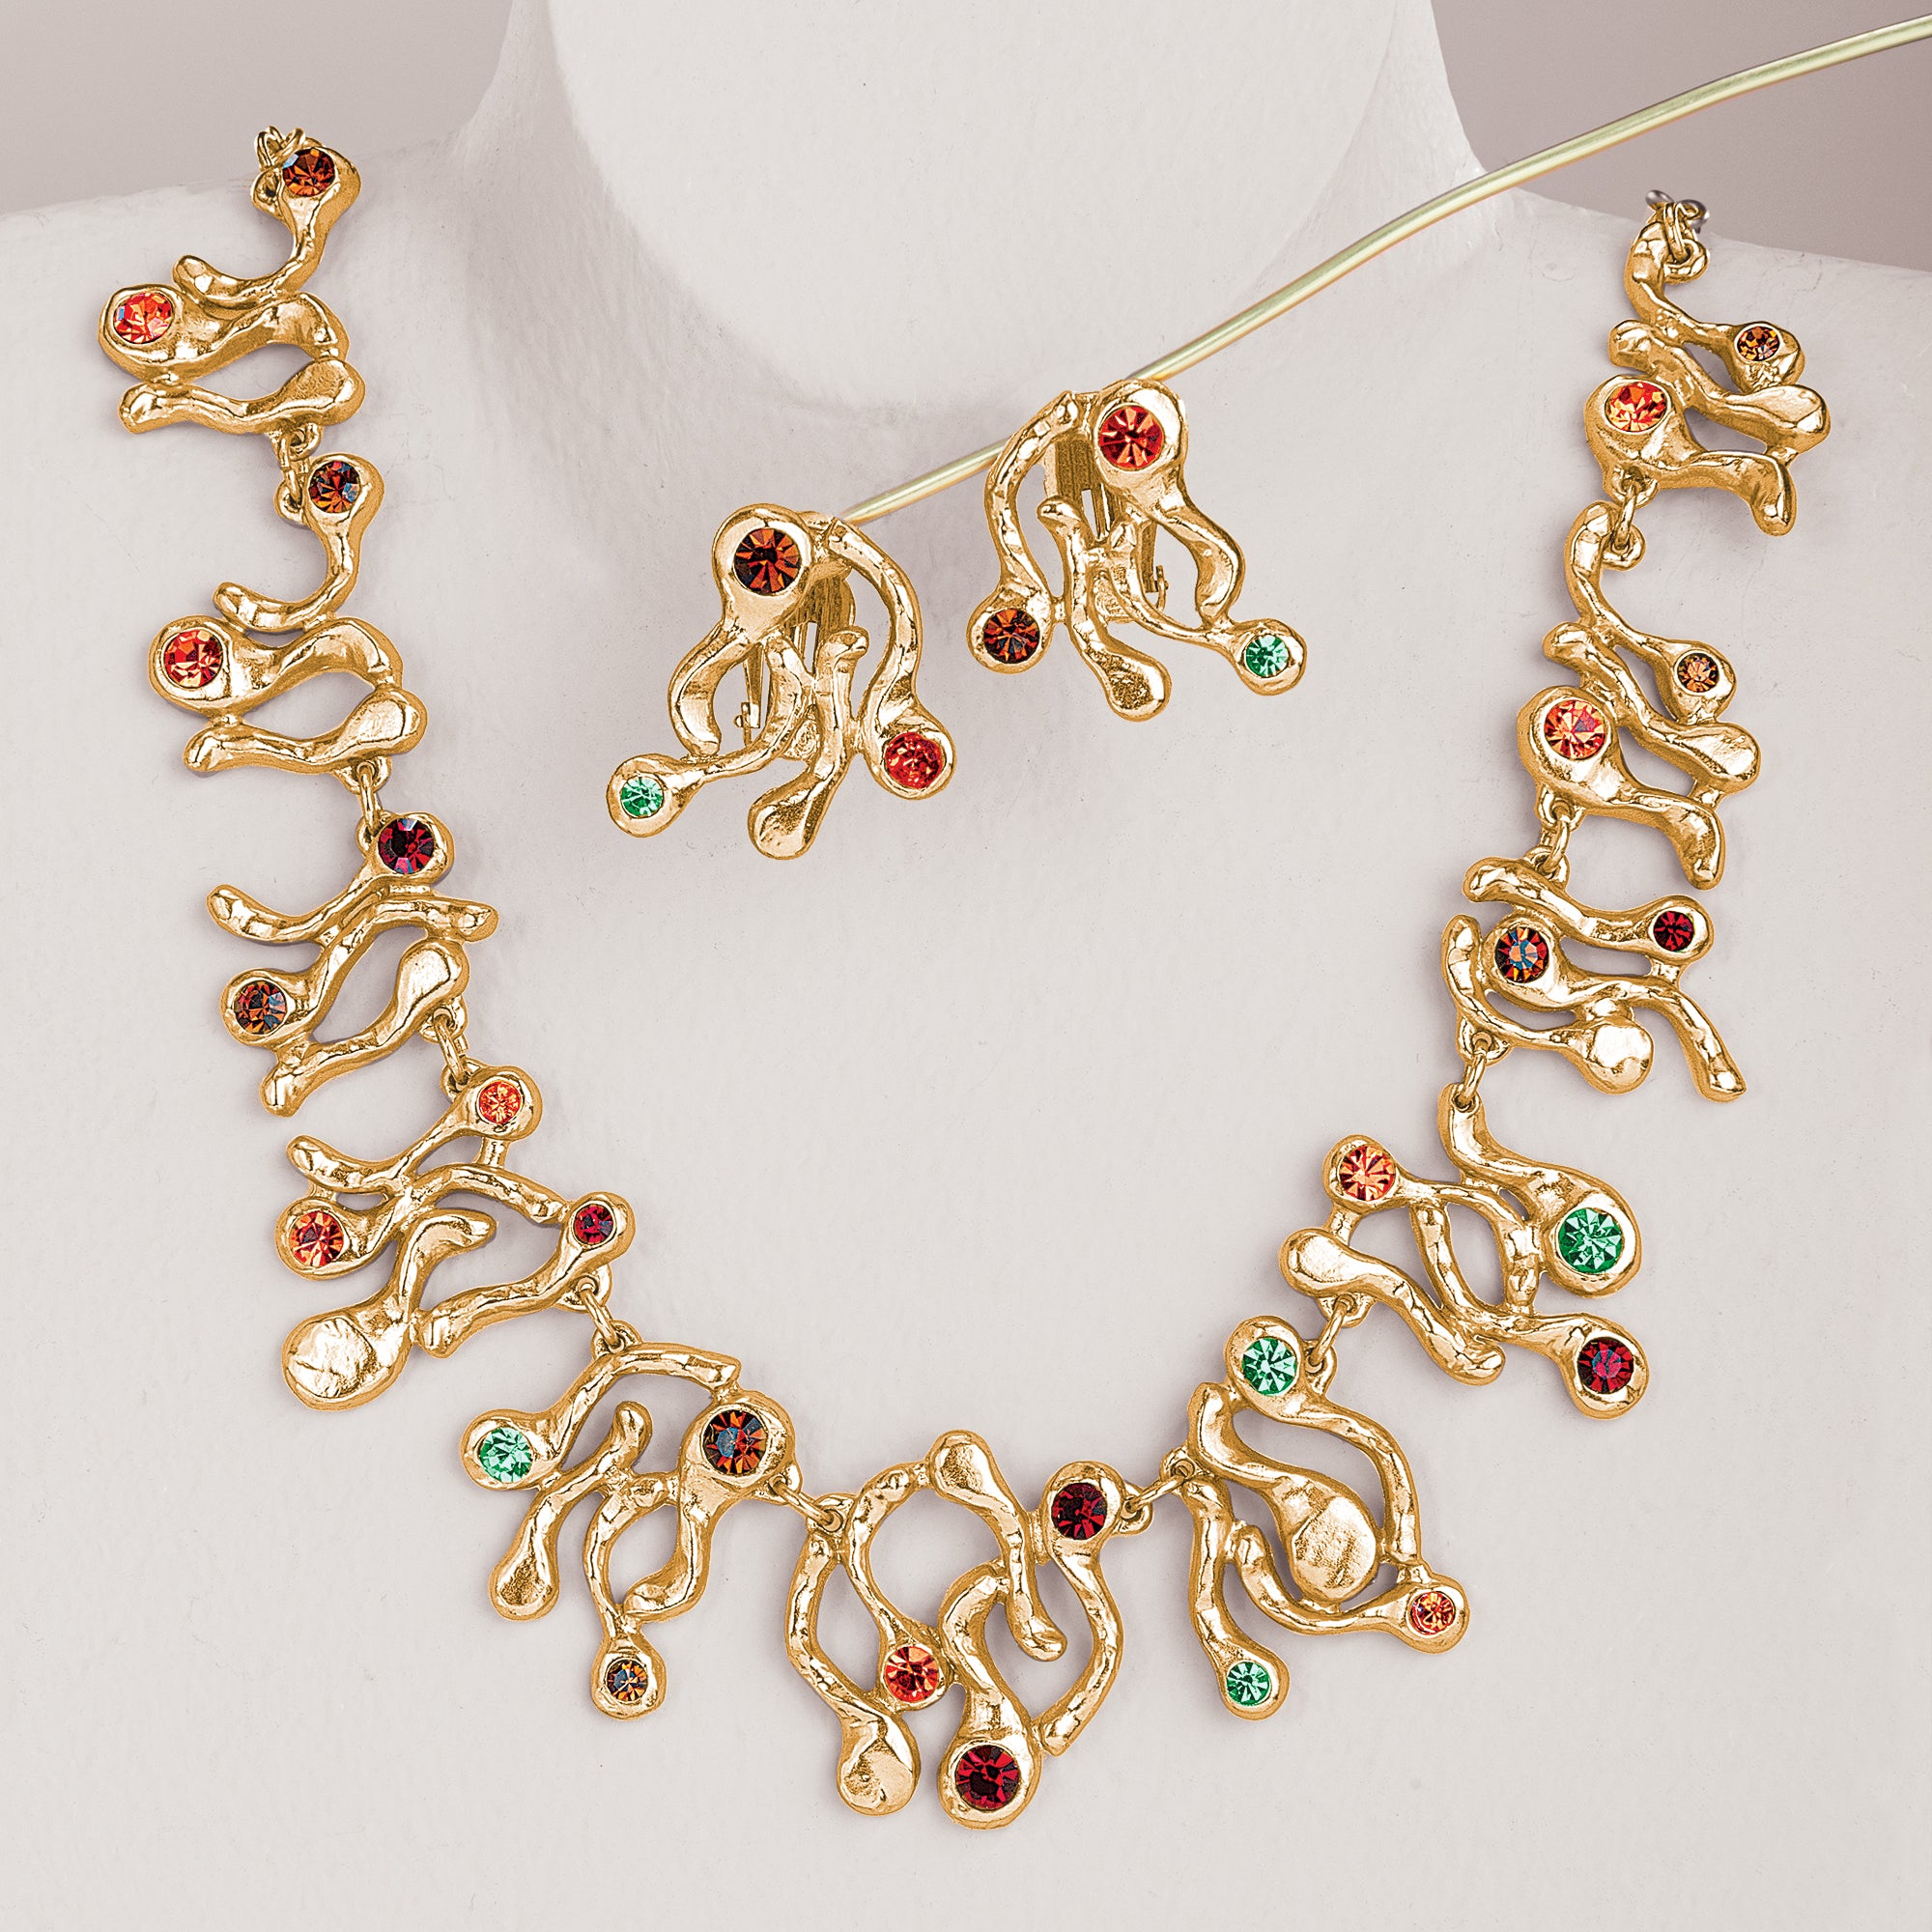 Bejeweled Brilliance Necklace